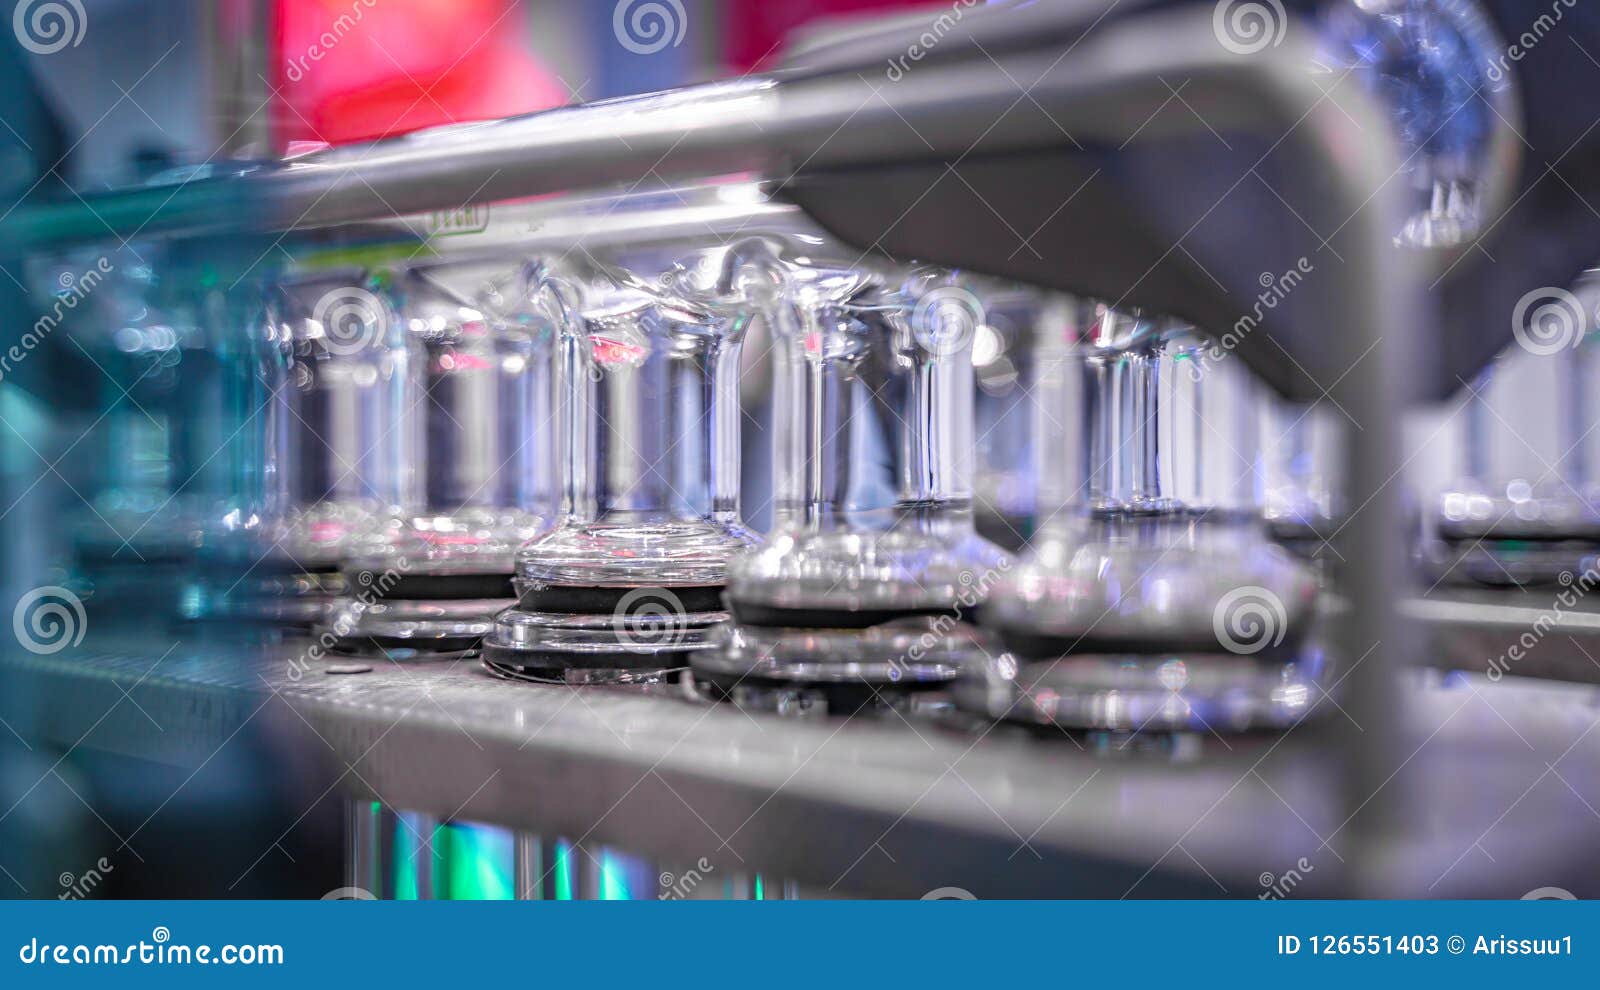 Industrial Science Device in Laboratory Stock Image - Image of glass ...